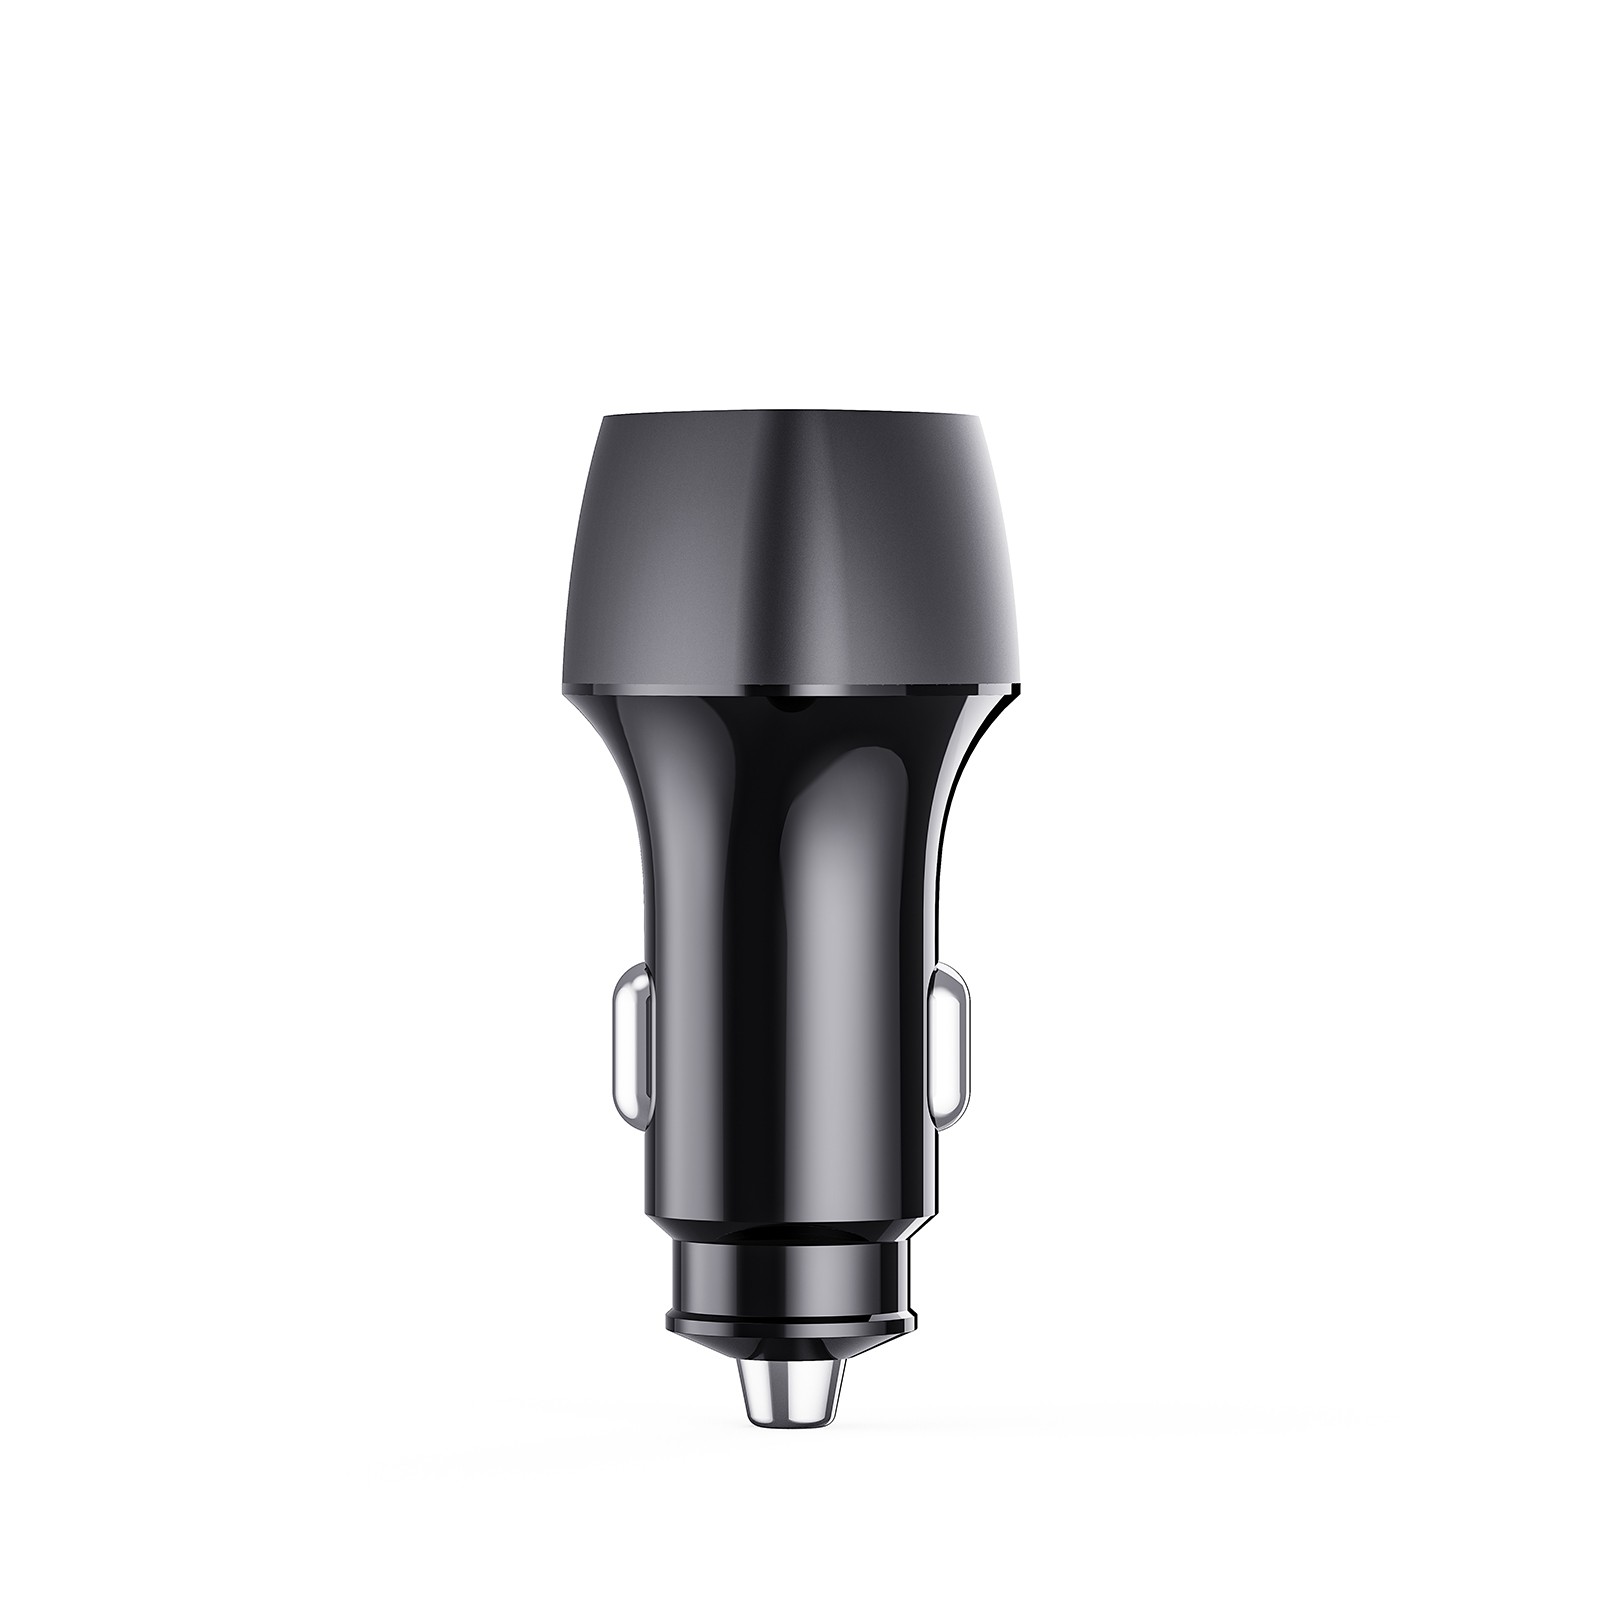 PD25W+PD20W Fast In Car Phone Charger